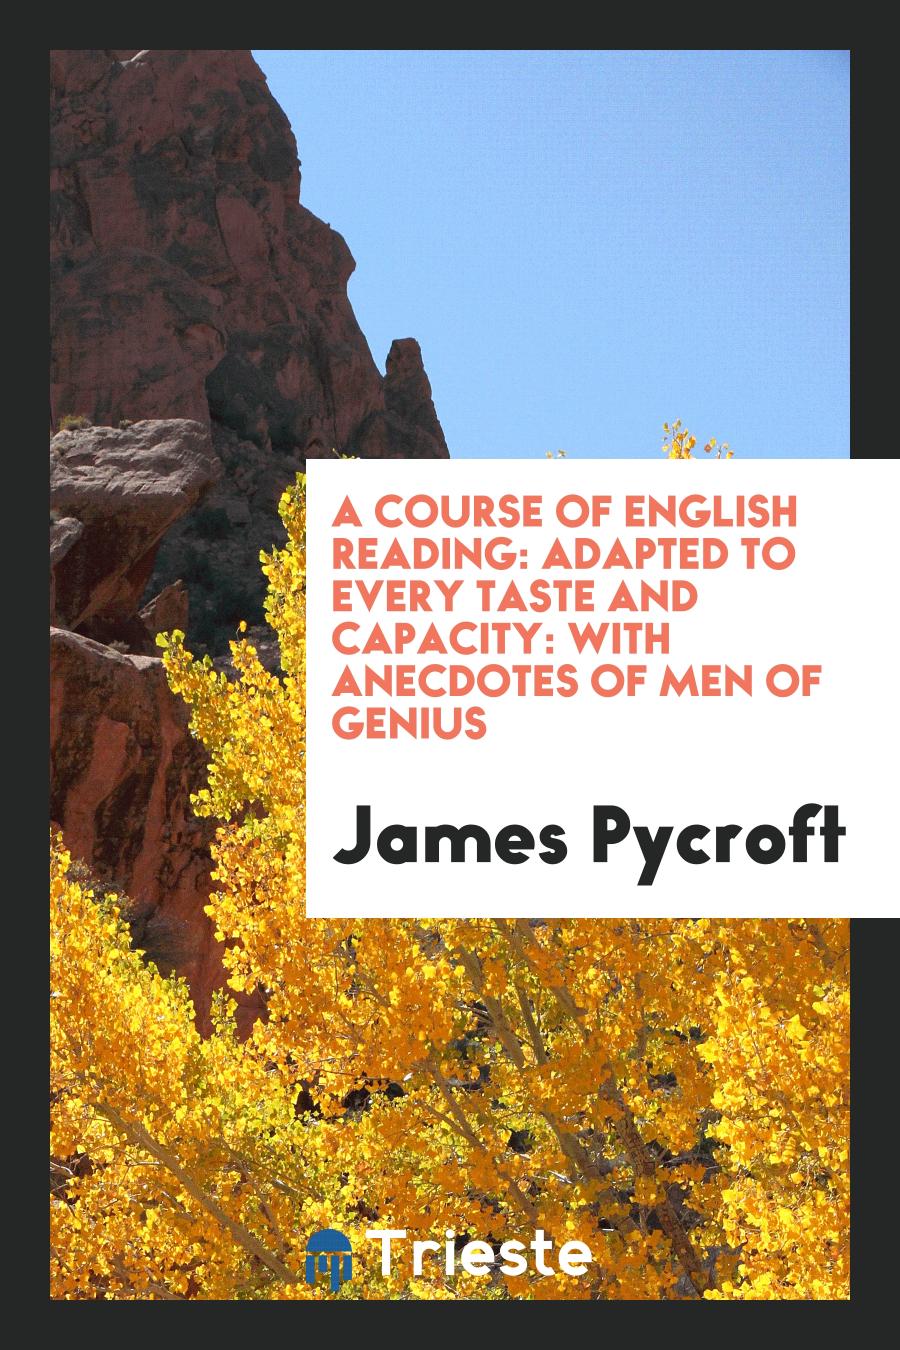 A Course of English Reading: Adapted to Every Taste and Capacity: with Anecdotes of Men of Genius